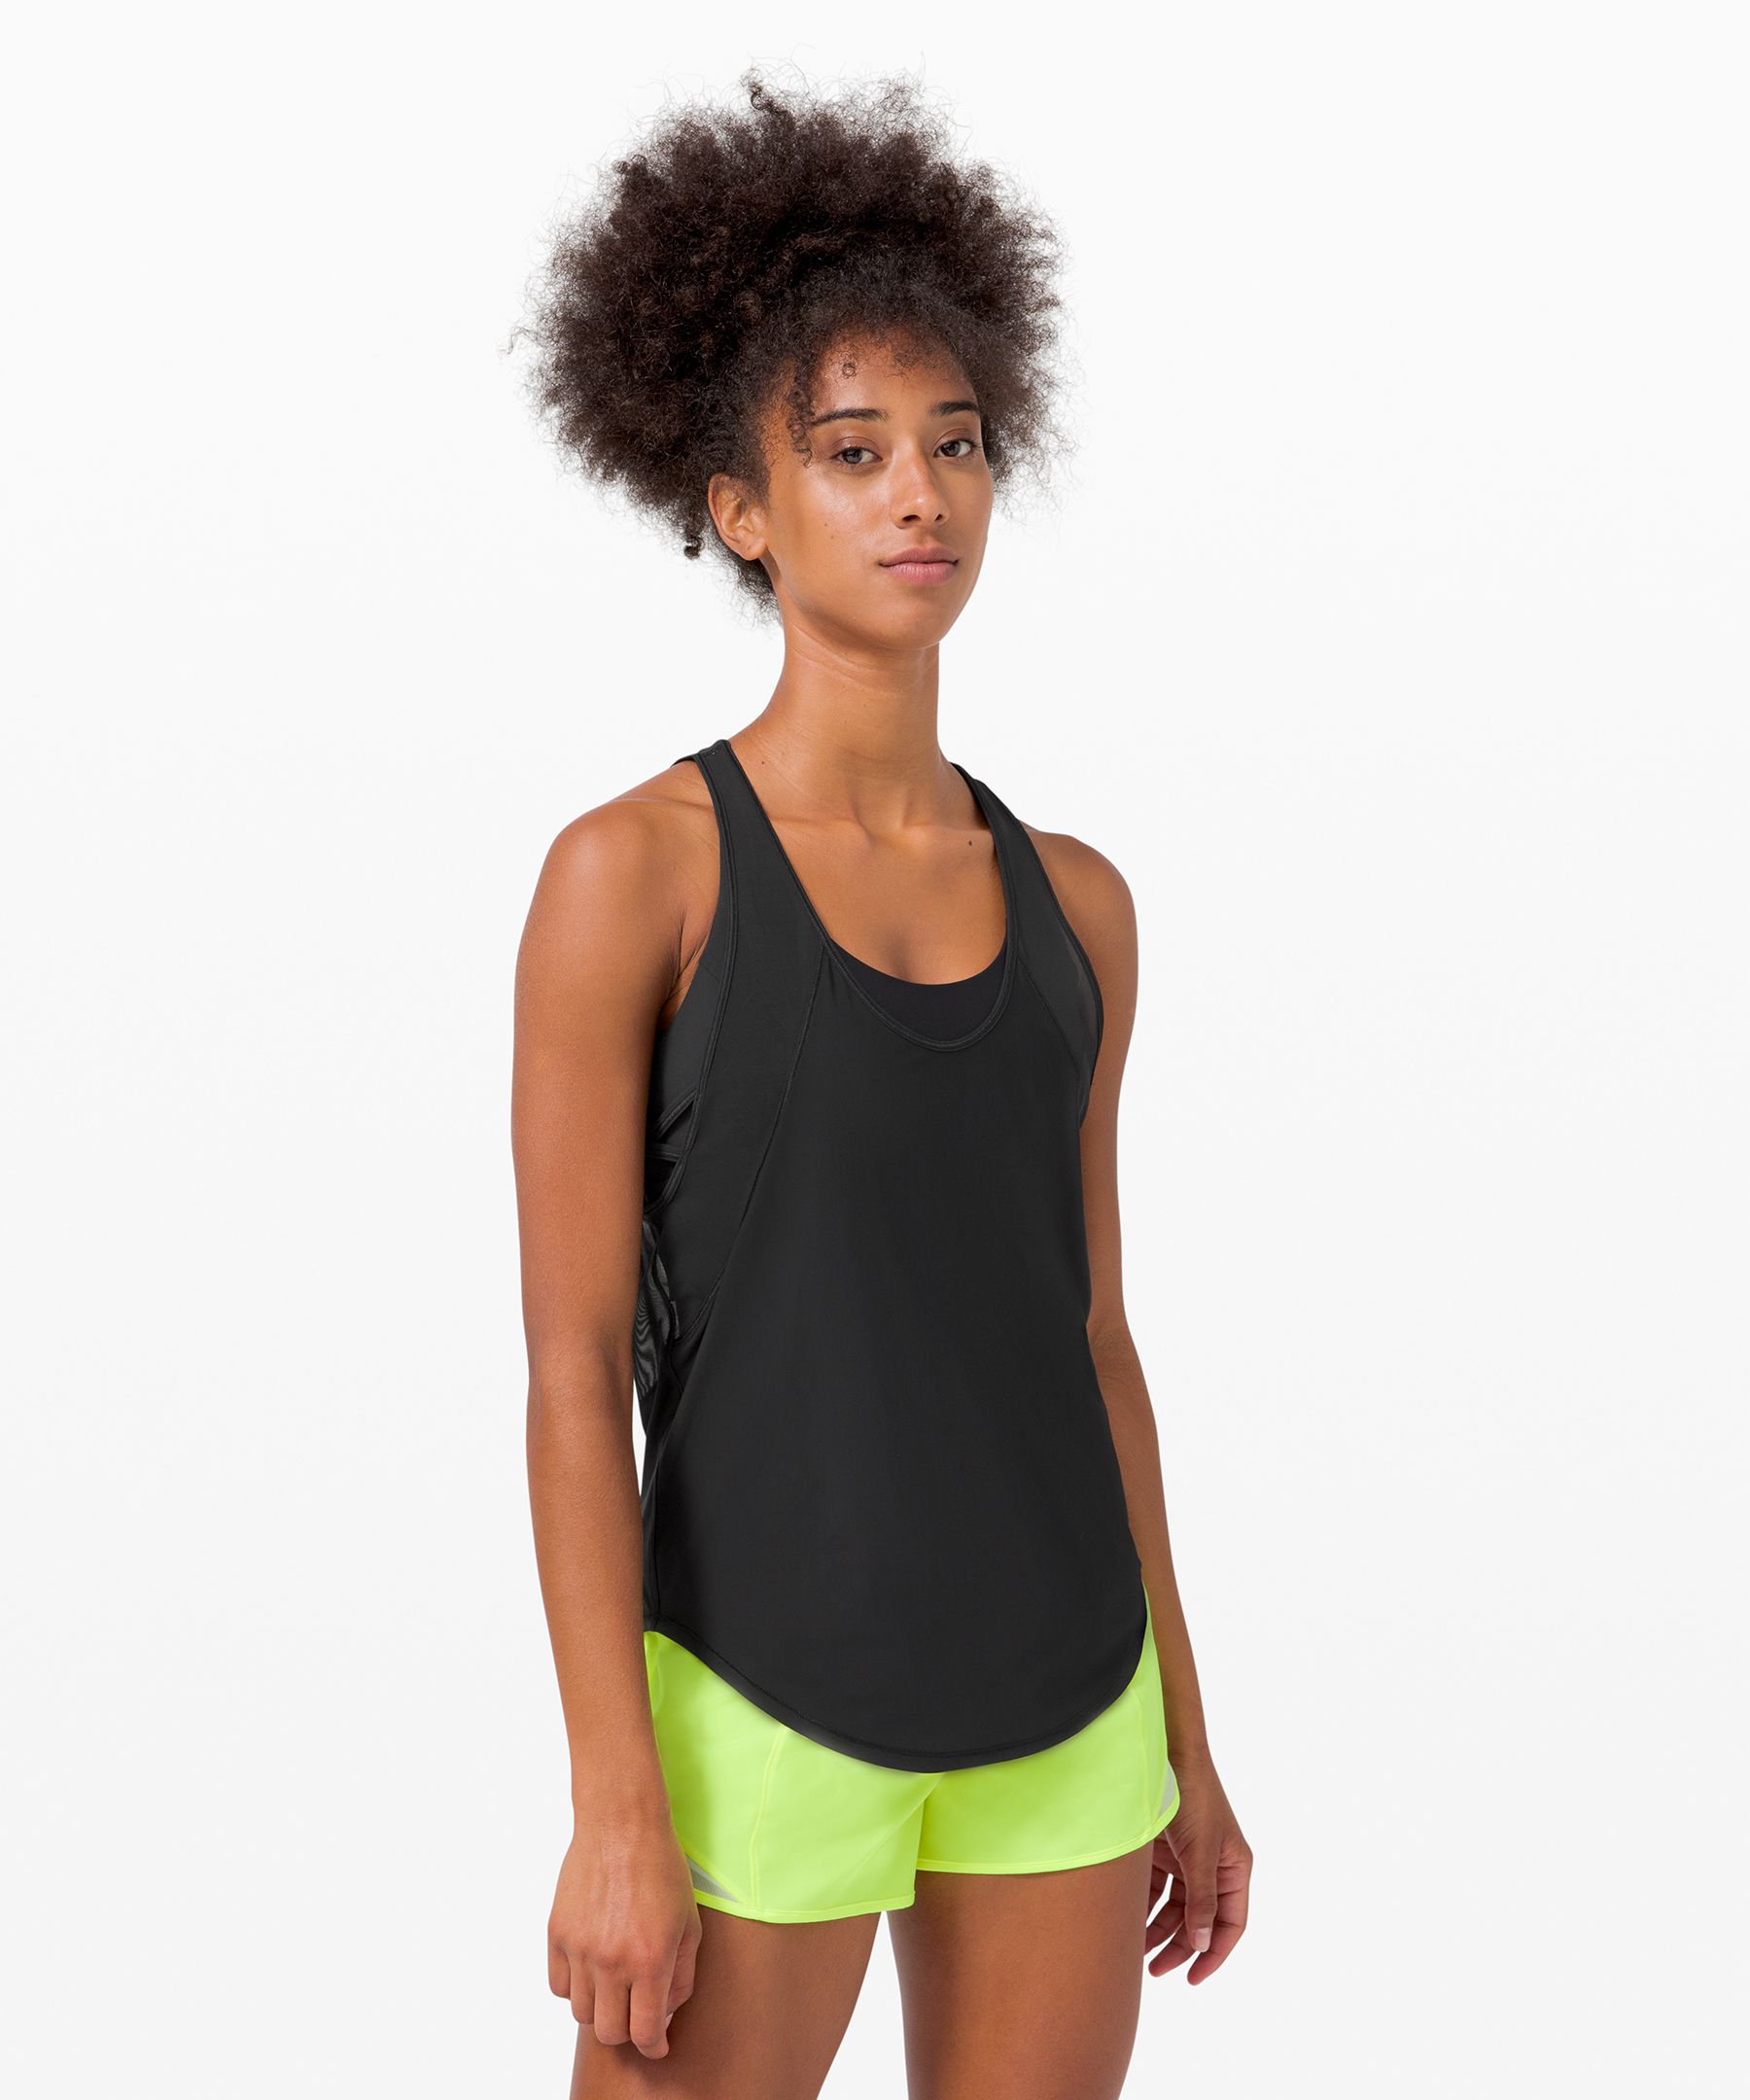 lululemon - Open back with a twist. This 2-in-1 tank and bra combo